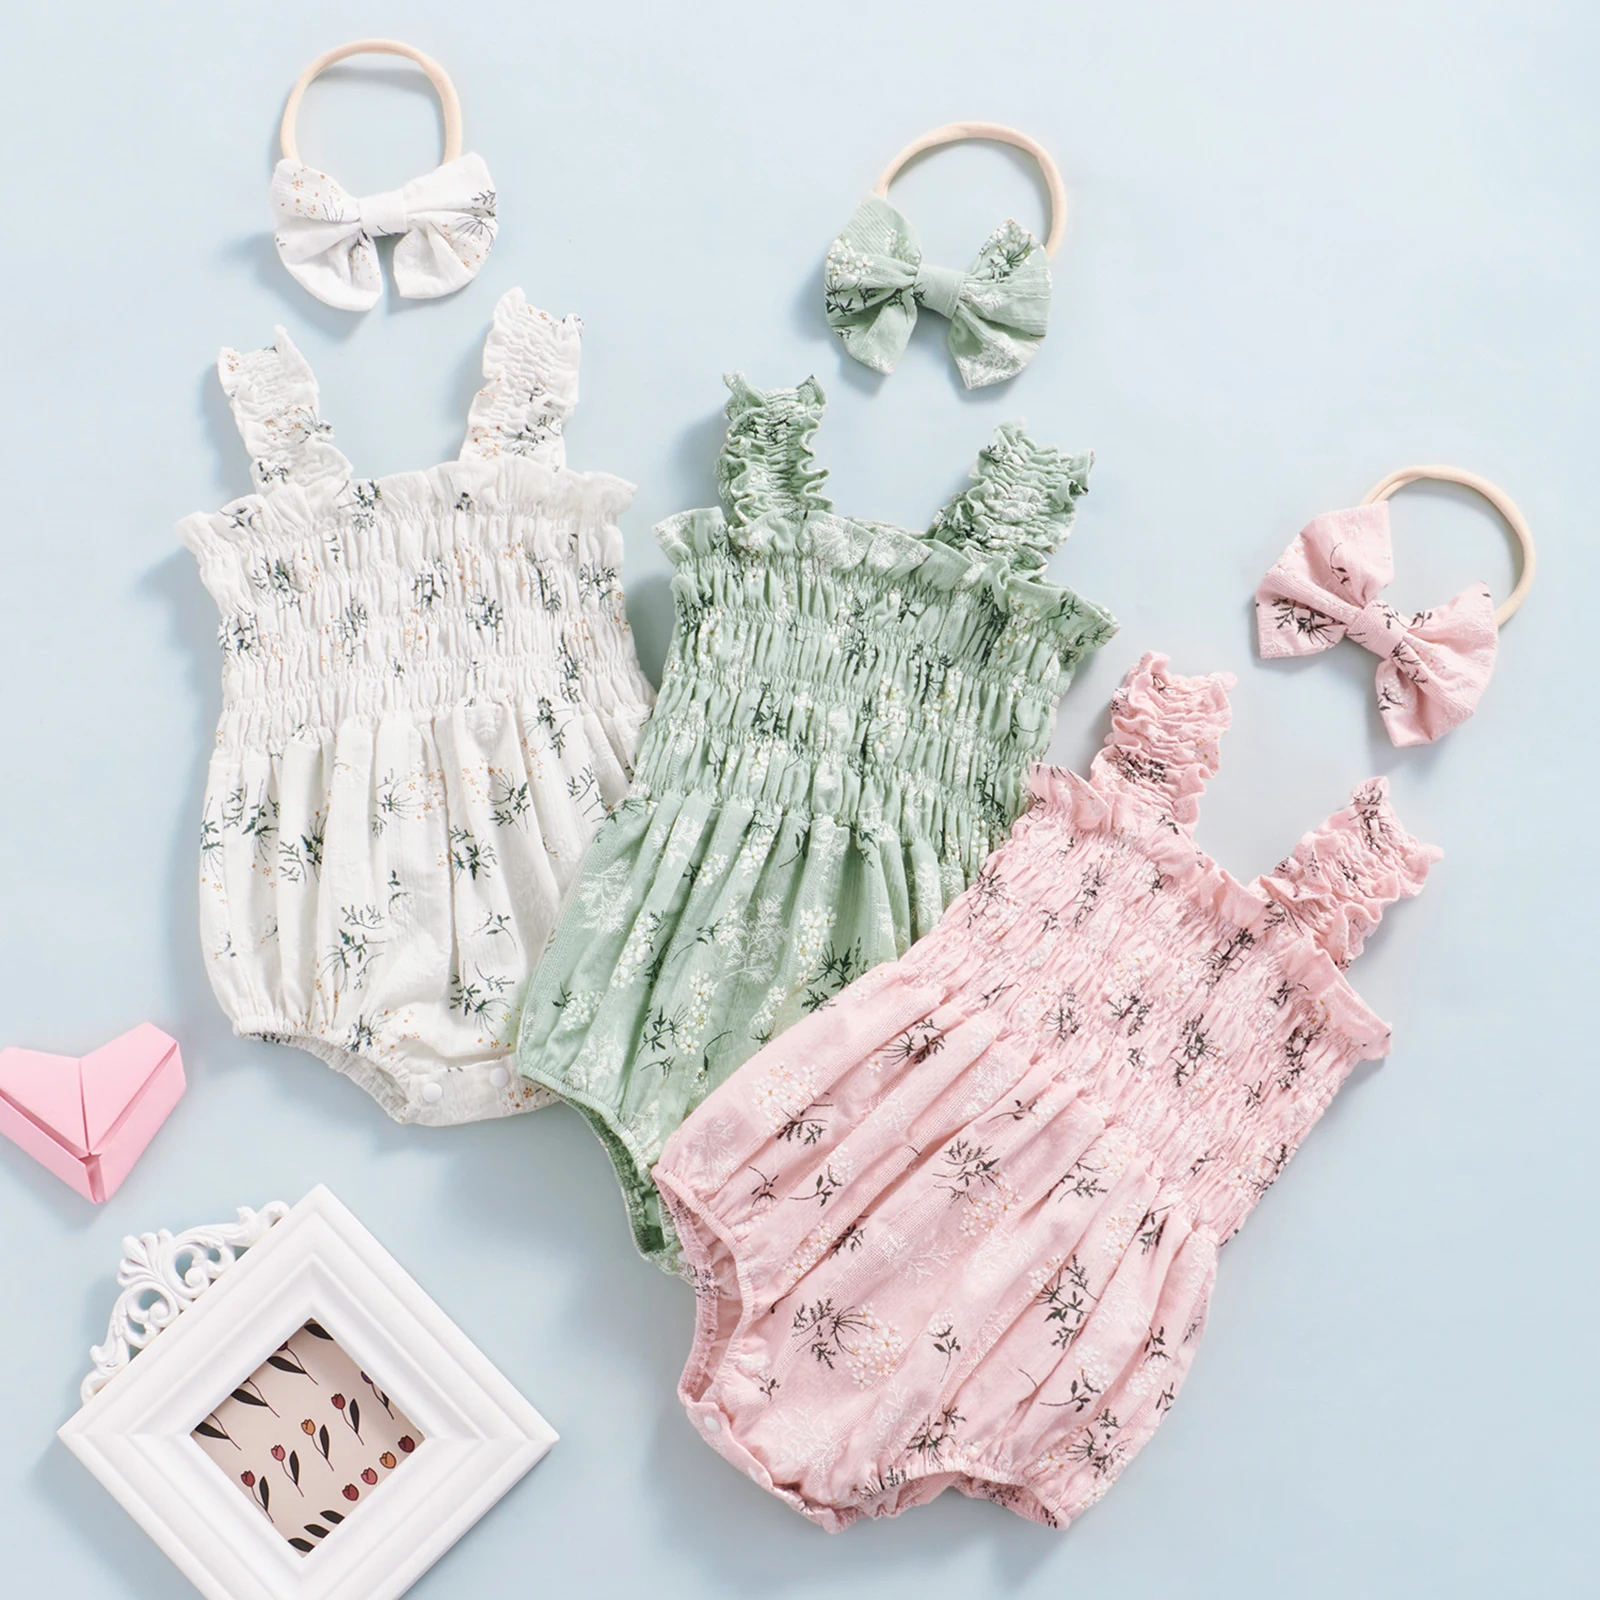 Ma&Baby 0-24M Newborn Infant Baby Girls Romper Flower Print Sleeveless Jumpsuit Playsuit Summer Costumes Clothing D01 Baby Bodysuits expensive